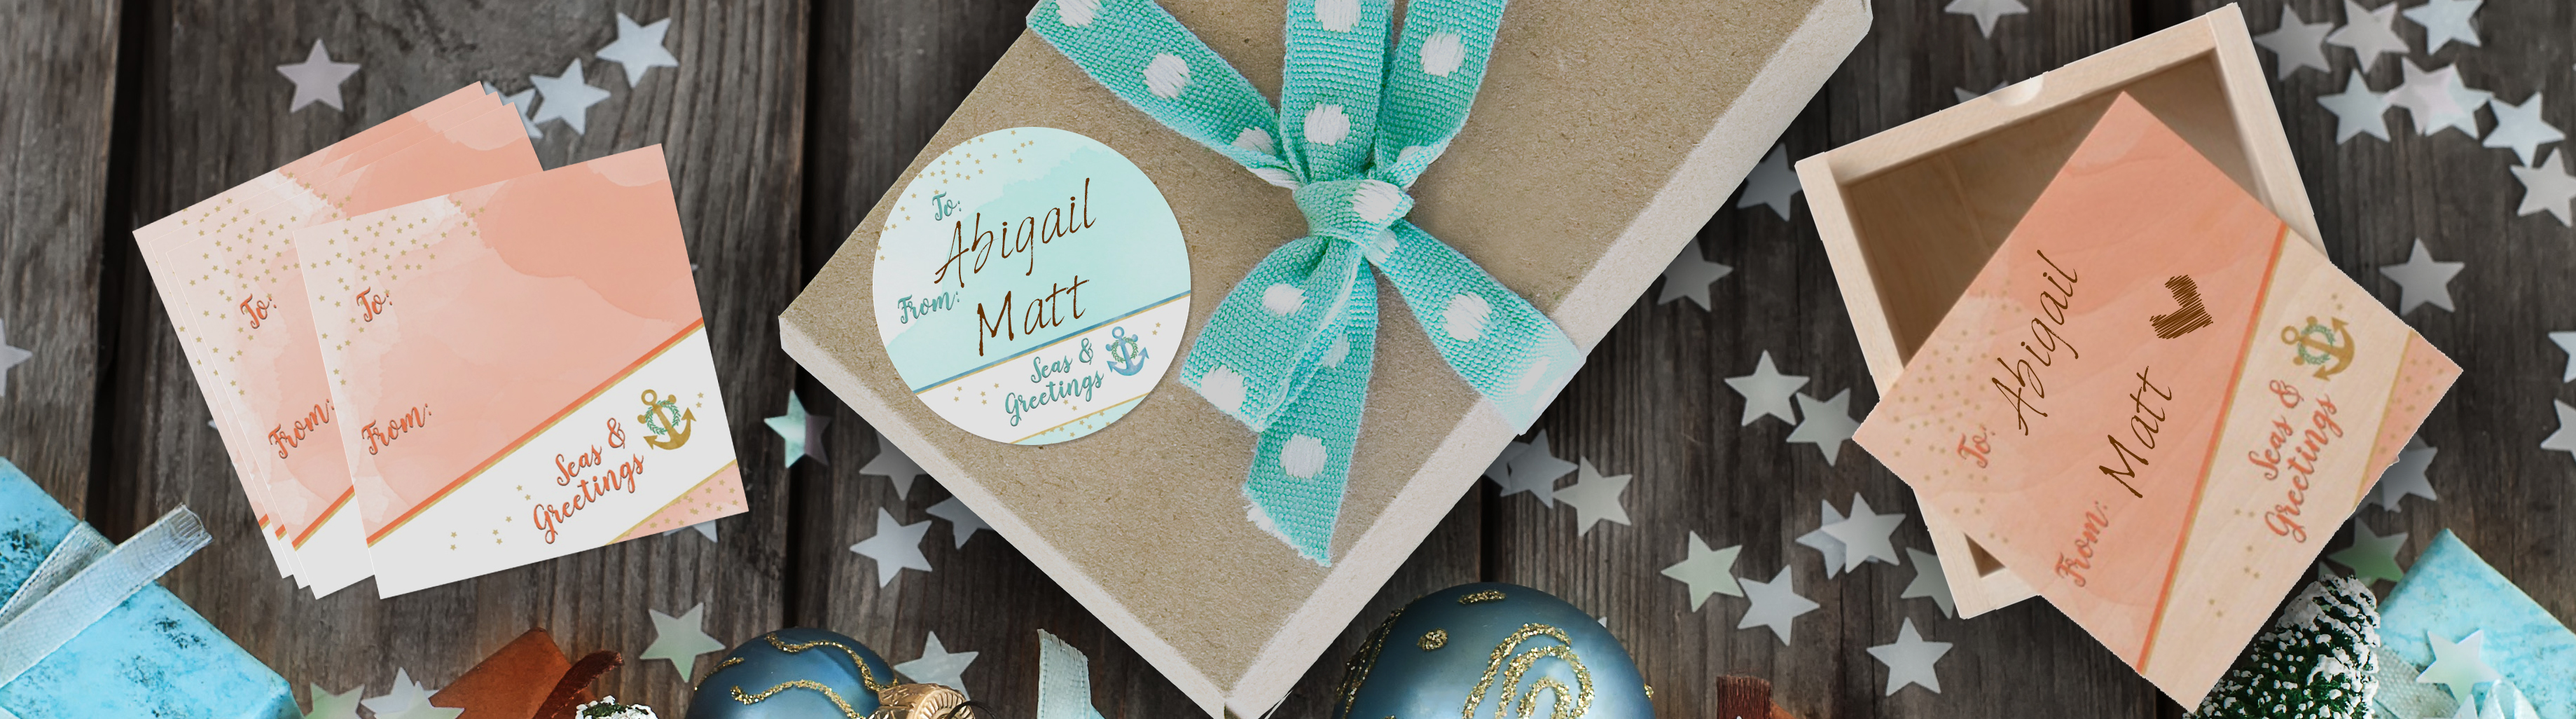 Nautical Seas and Greetings Gift Tags and Wrapping Paper Mockup